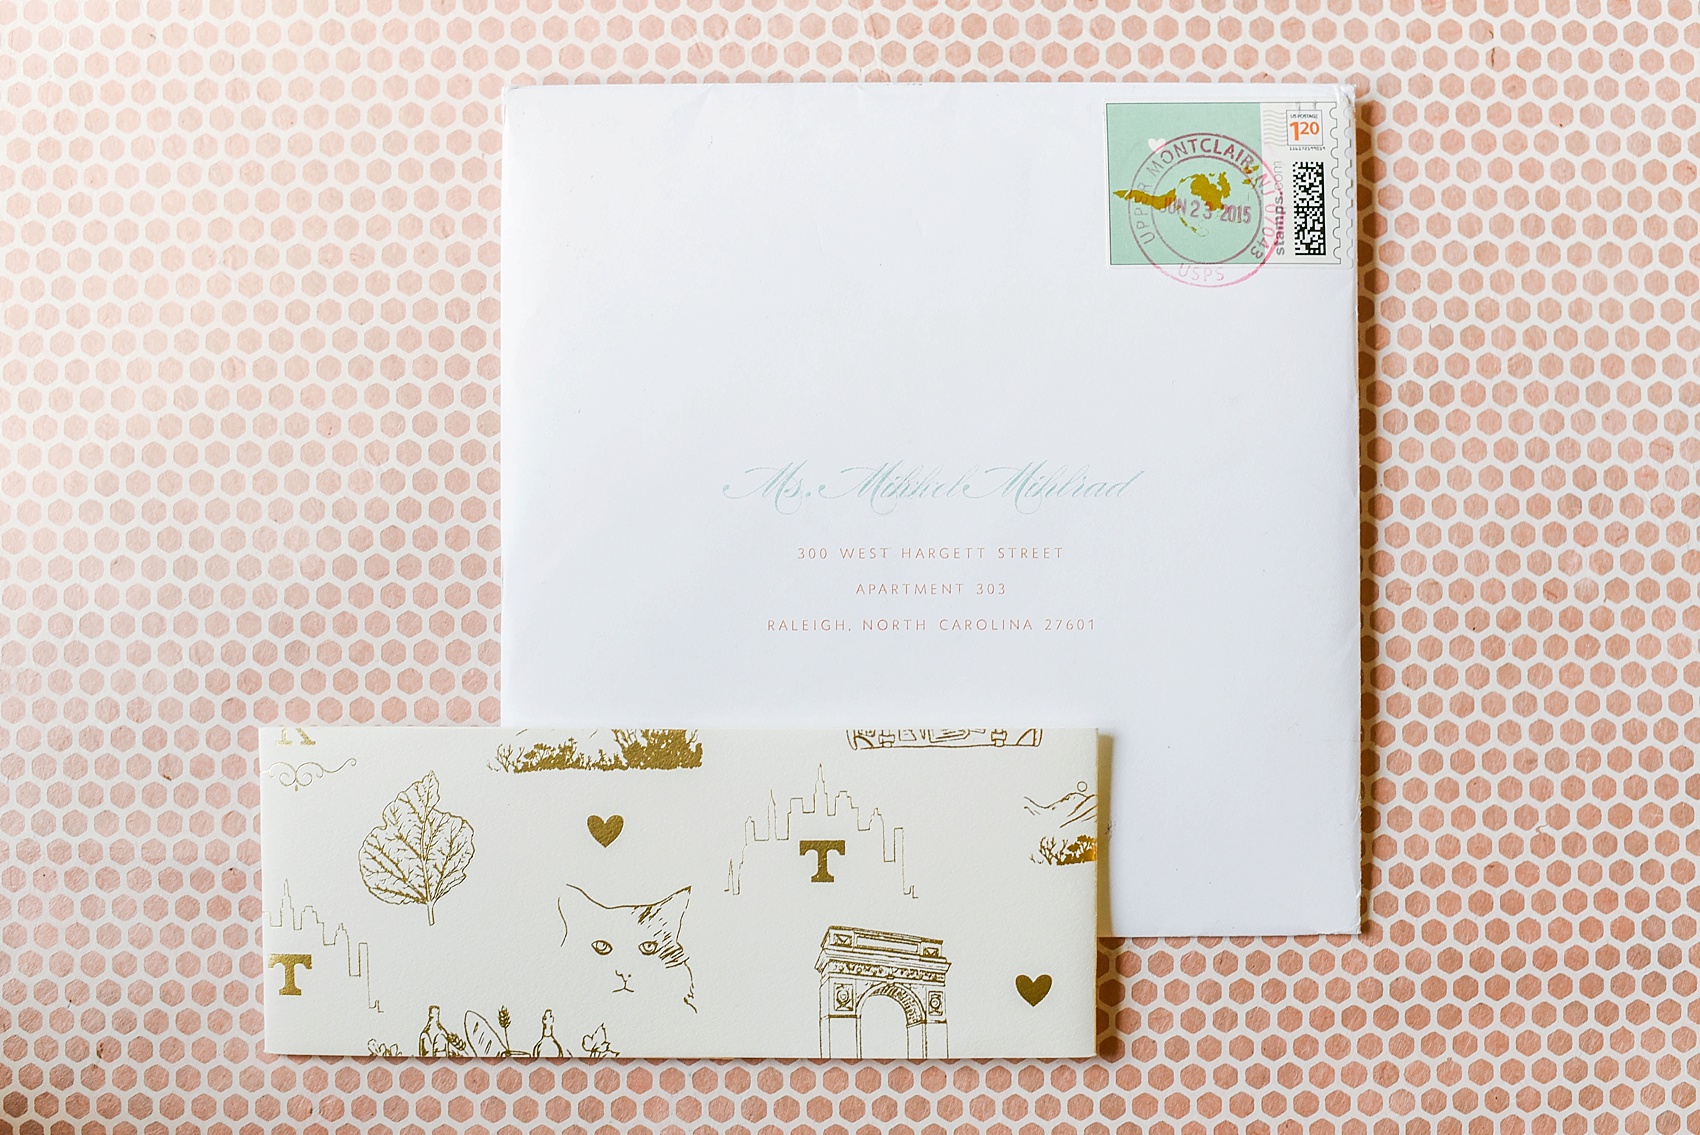 Custom letterpress invitation. Photo by Mikkel Paige Photography, invitation by Katie Fischer Design for Brittny Drye's wedding, CEO and Editor-in-Chief of Love Inc. Mag